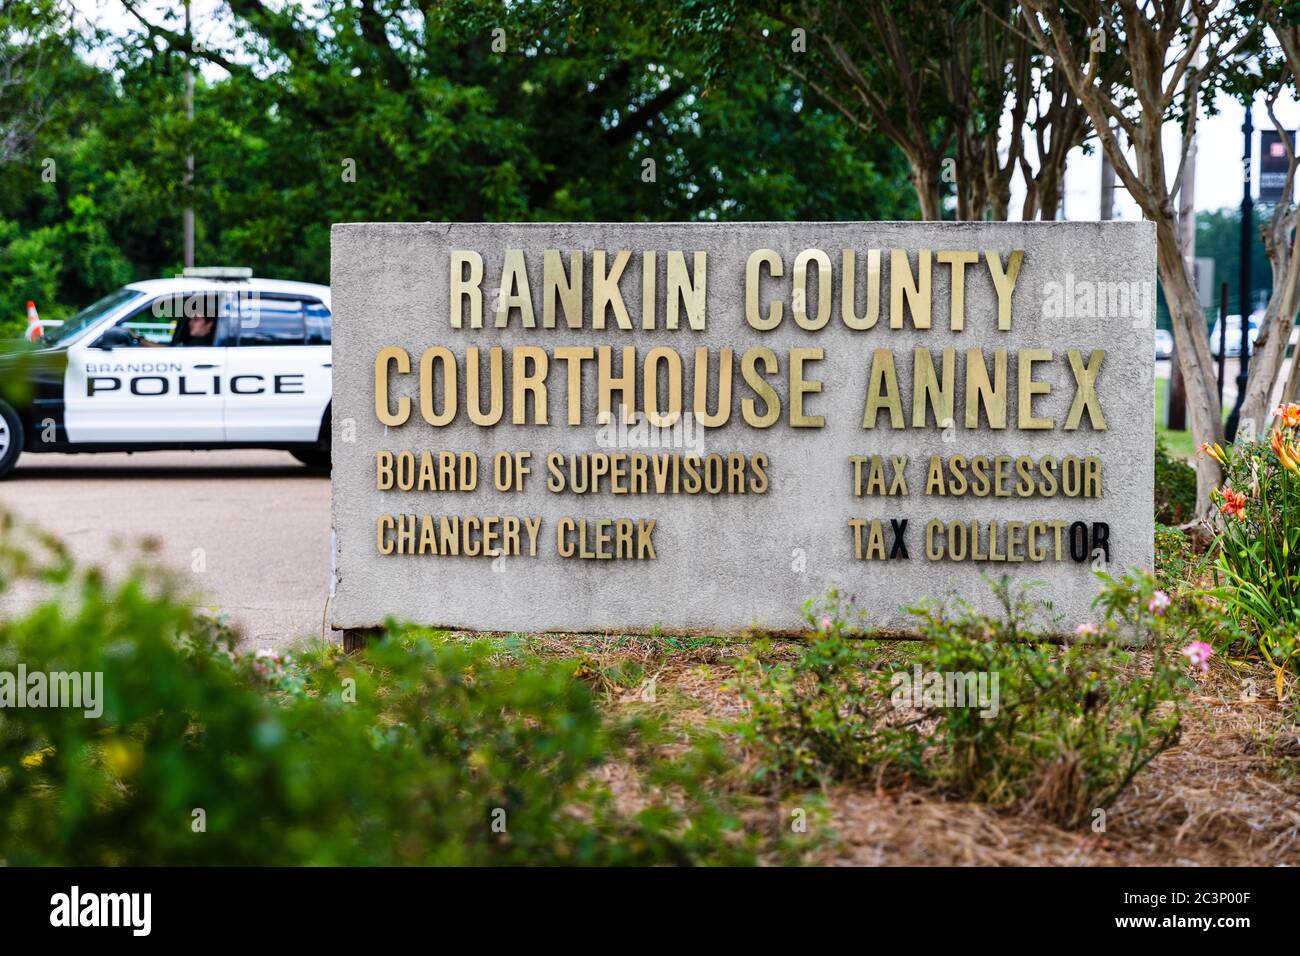 Brandon, MS / USA - June 20, 2020: Rankin County Courthouse Annex sign in downtown Brandon, MS, with police car in background Stock Photo